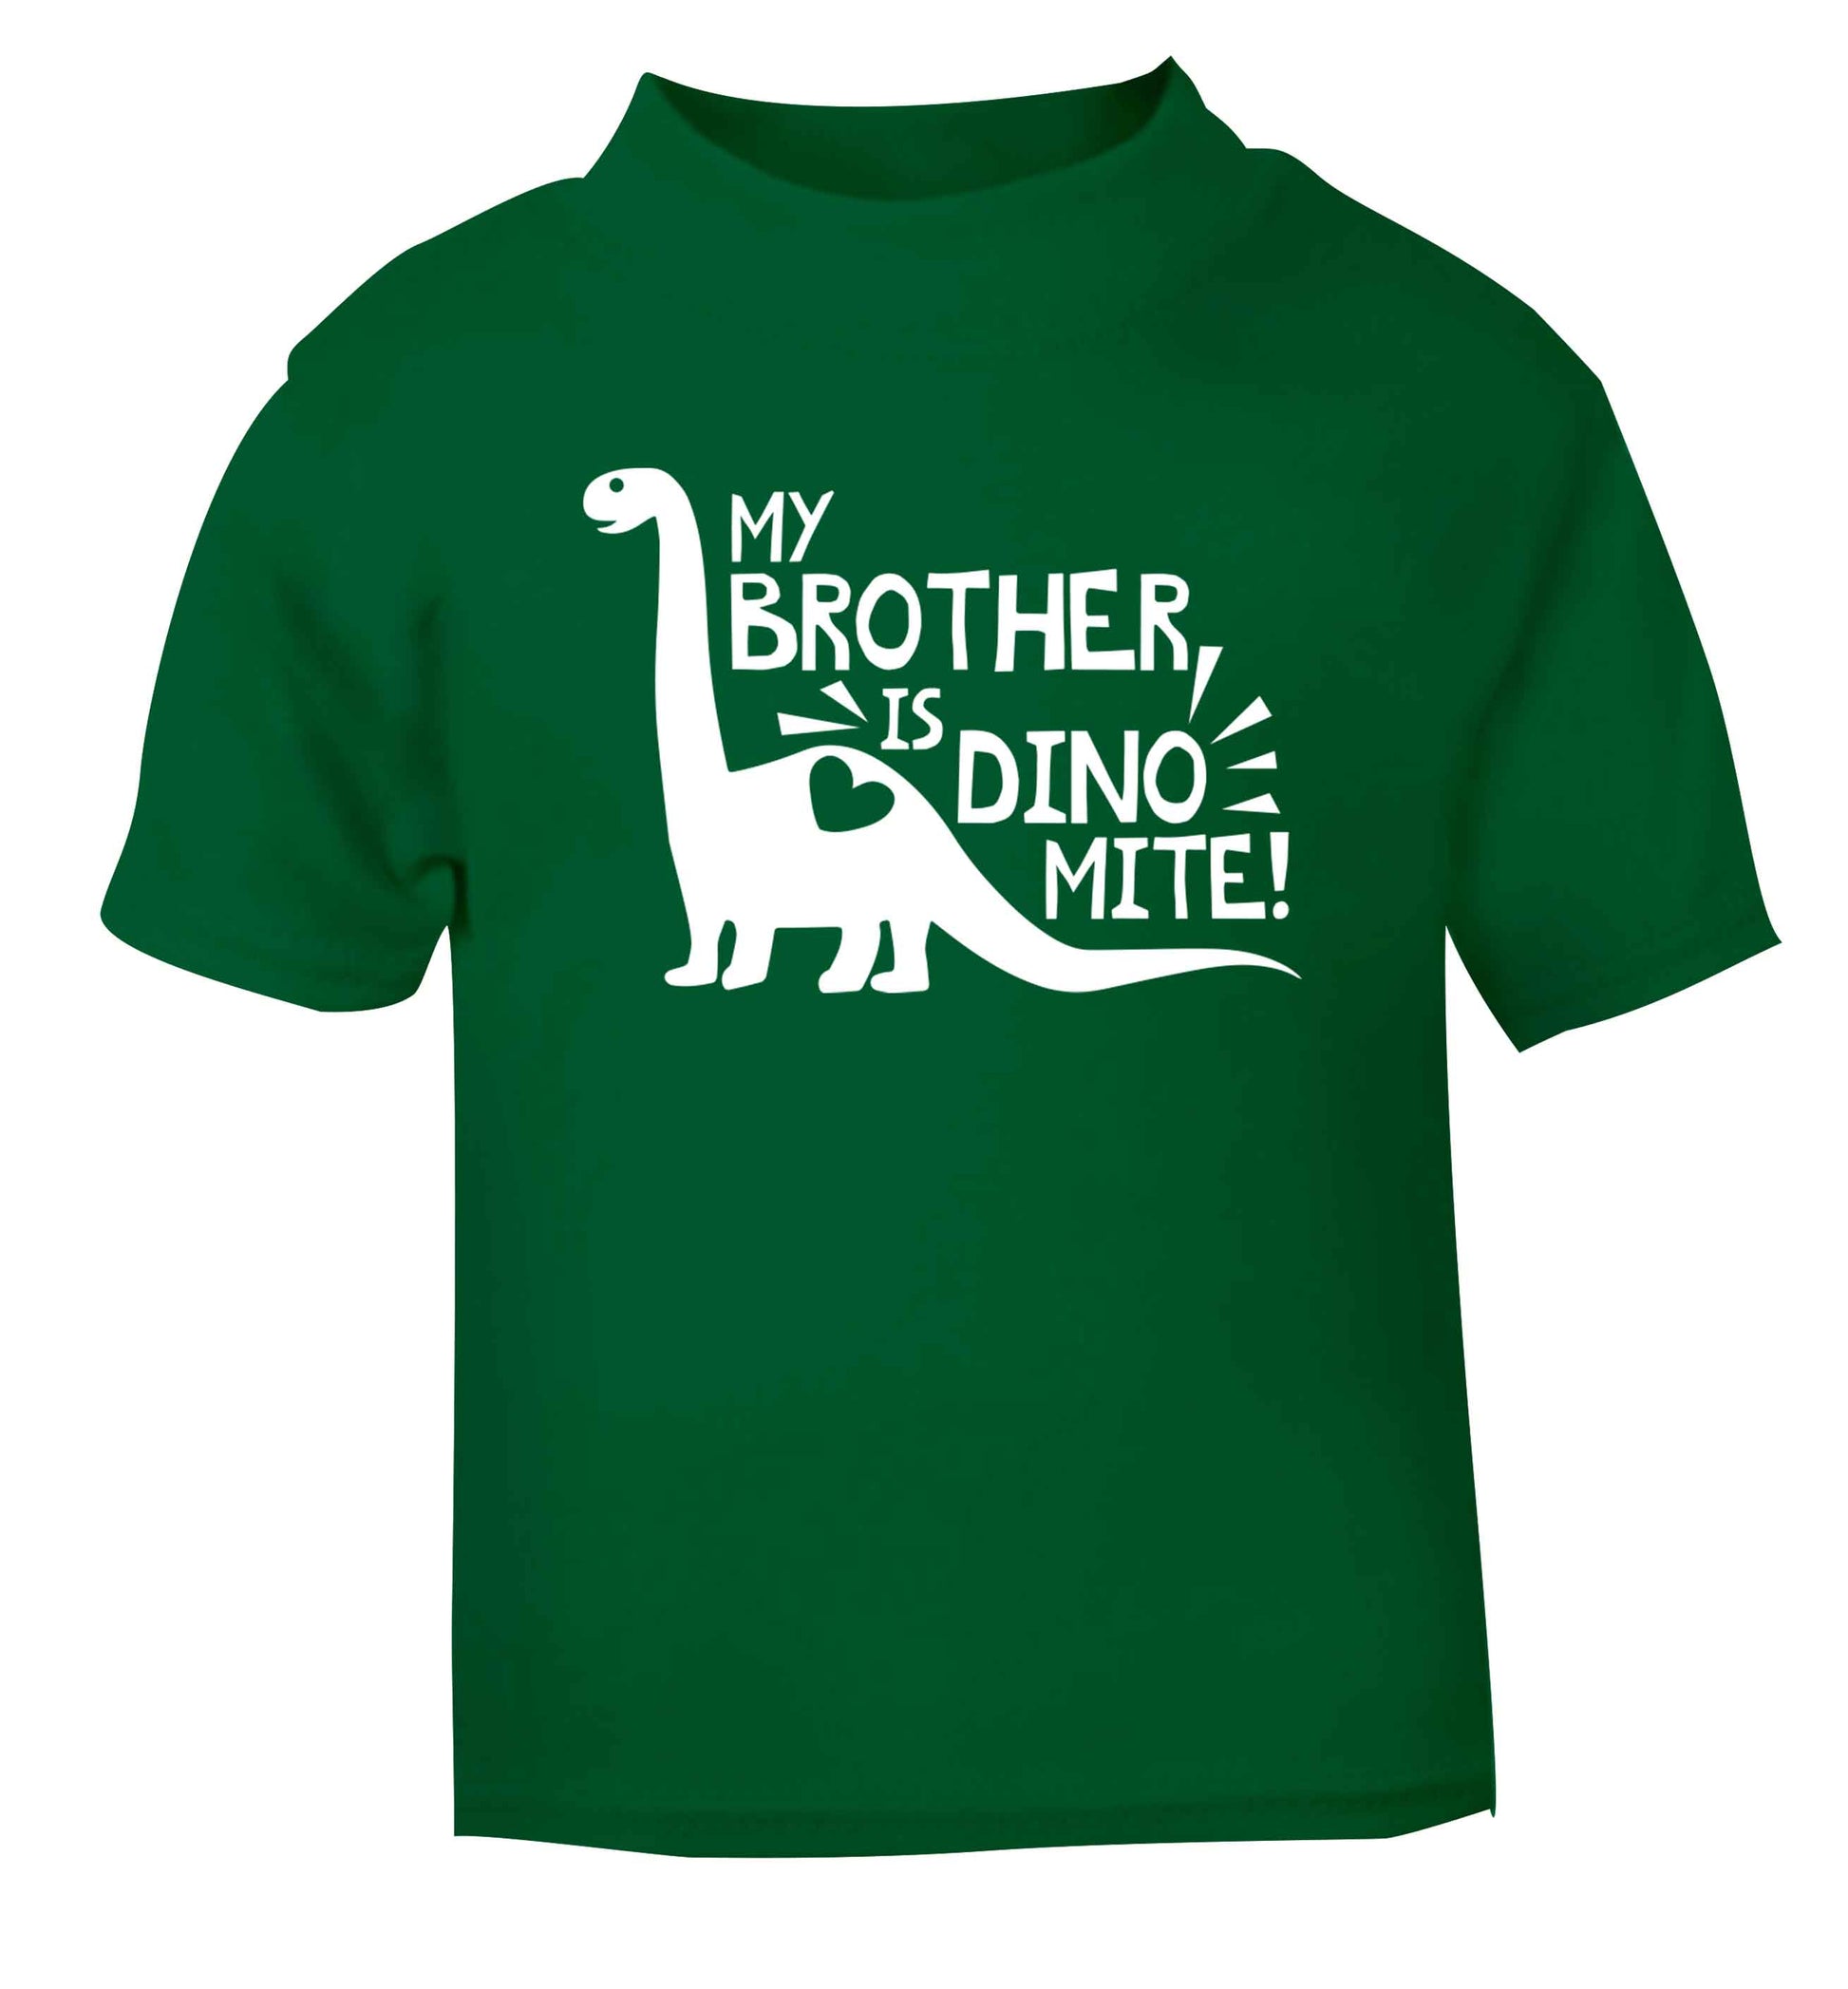 My brother is dinomite! green Baby Toddler Tshirt 2 Years